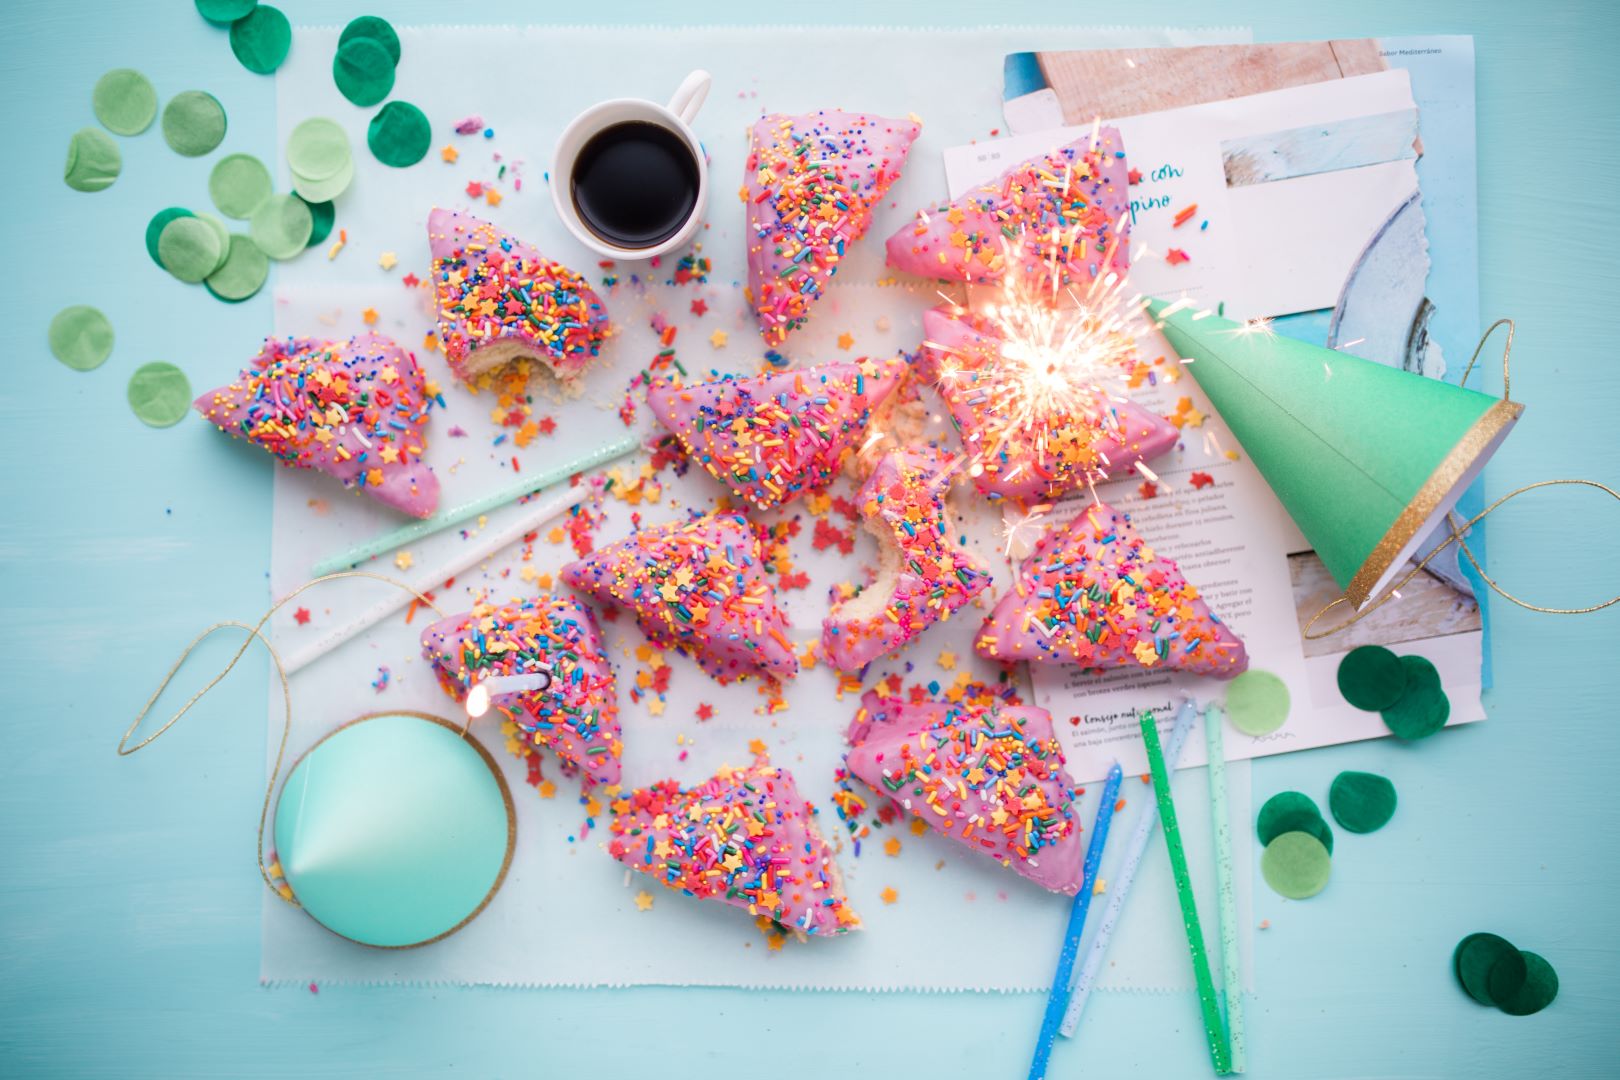 Baking for loved ones: Baking ideas and inspirations for the perfect Surprise Party, they’ll remember forever